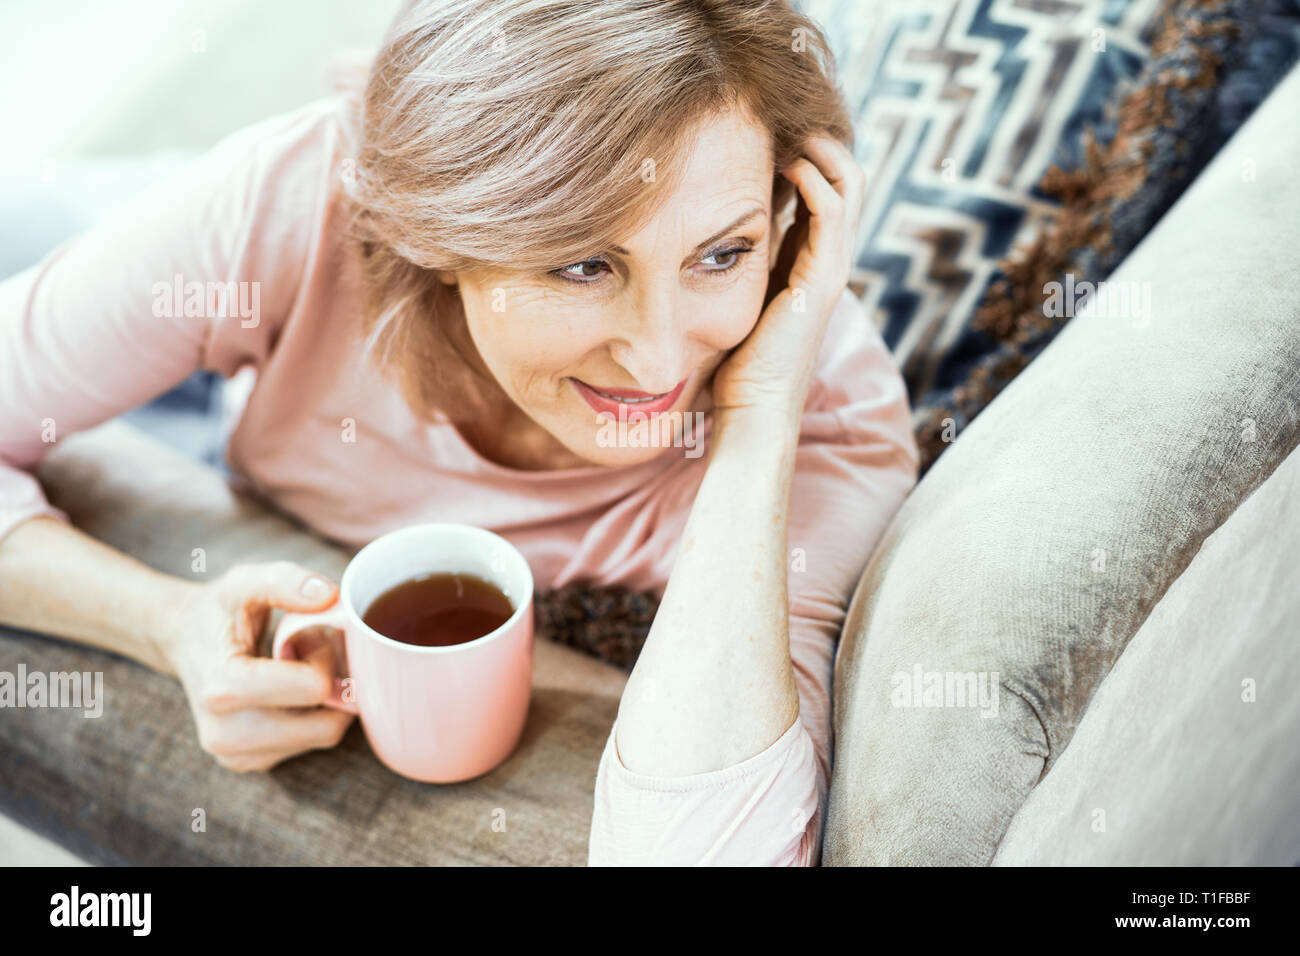 Attractive middle aged woman relaxing at home Stock Photo